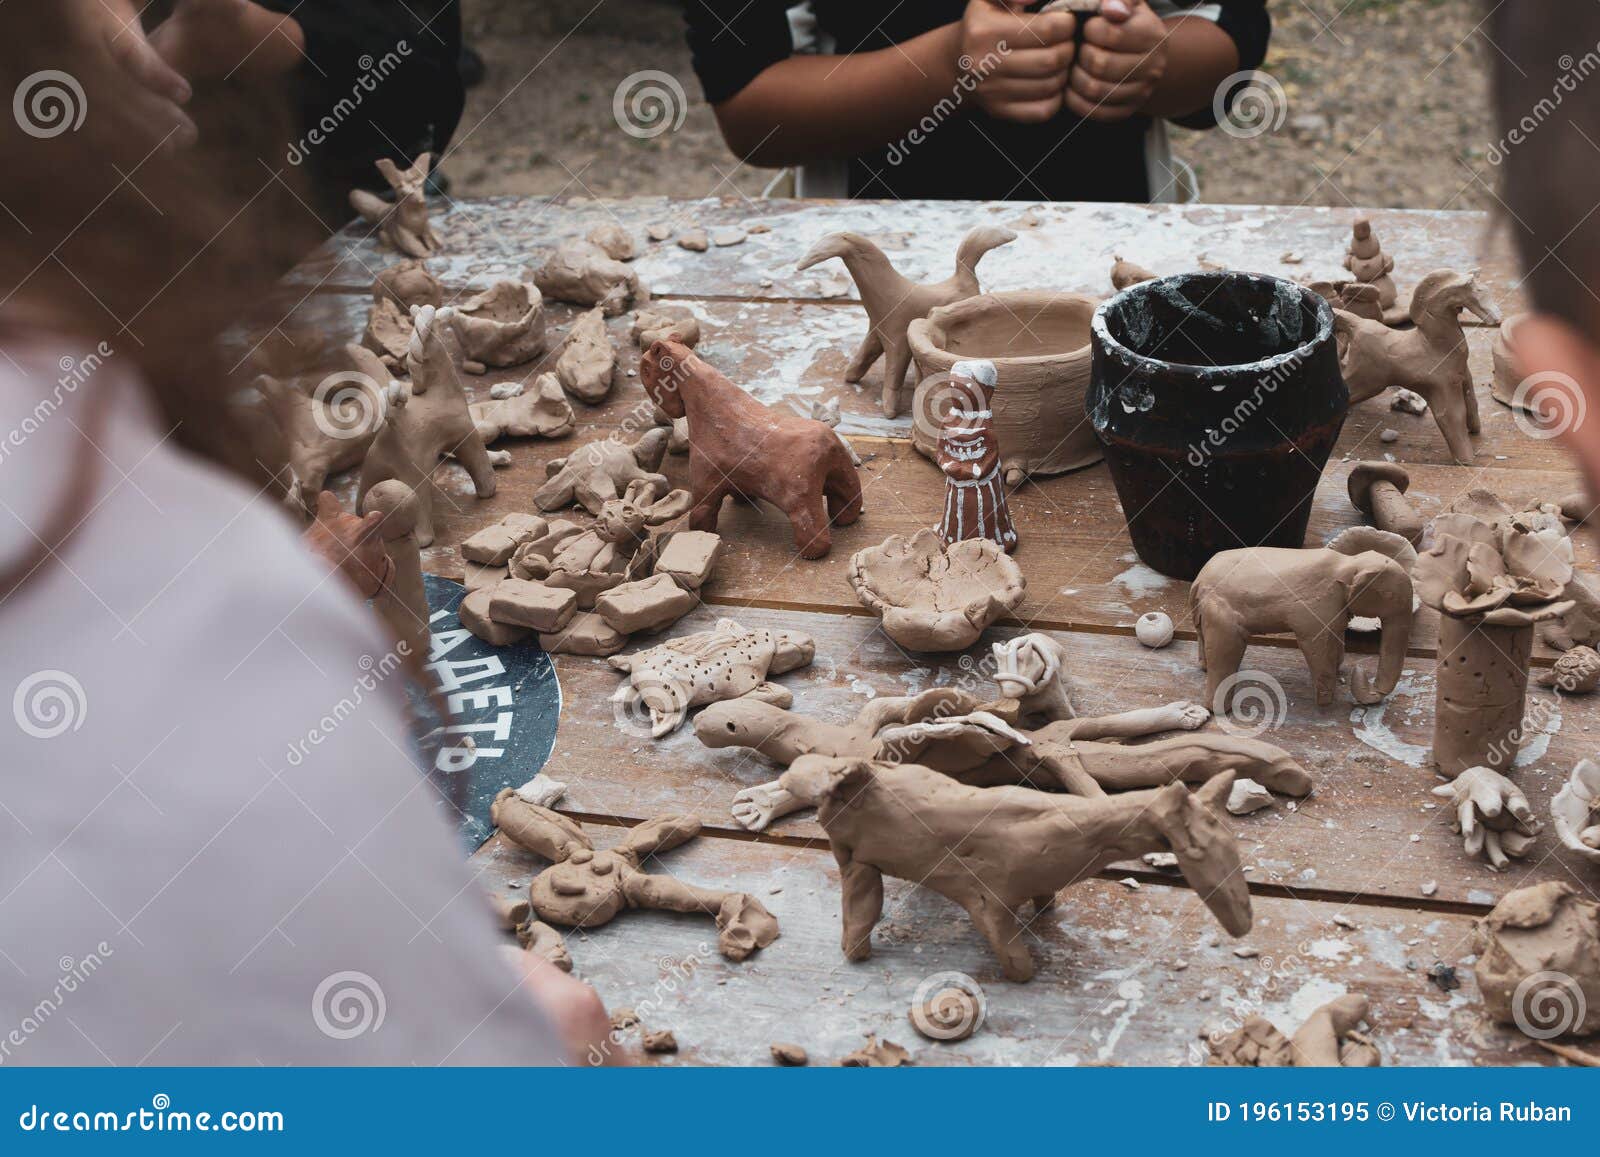 Children Sculpt Clay Figurines in the Open Air. Art, Creativity. Modeling  Clay, Cultural Traditions Editorial Image - Image of figurines, creativity:  196153195